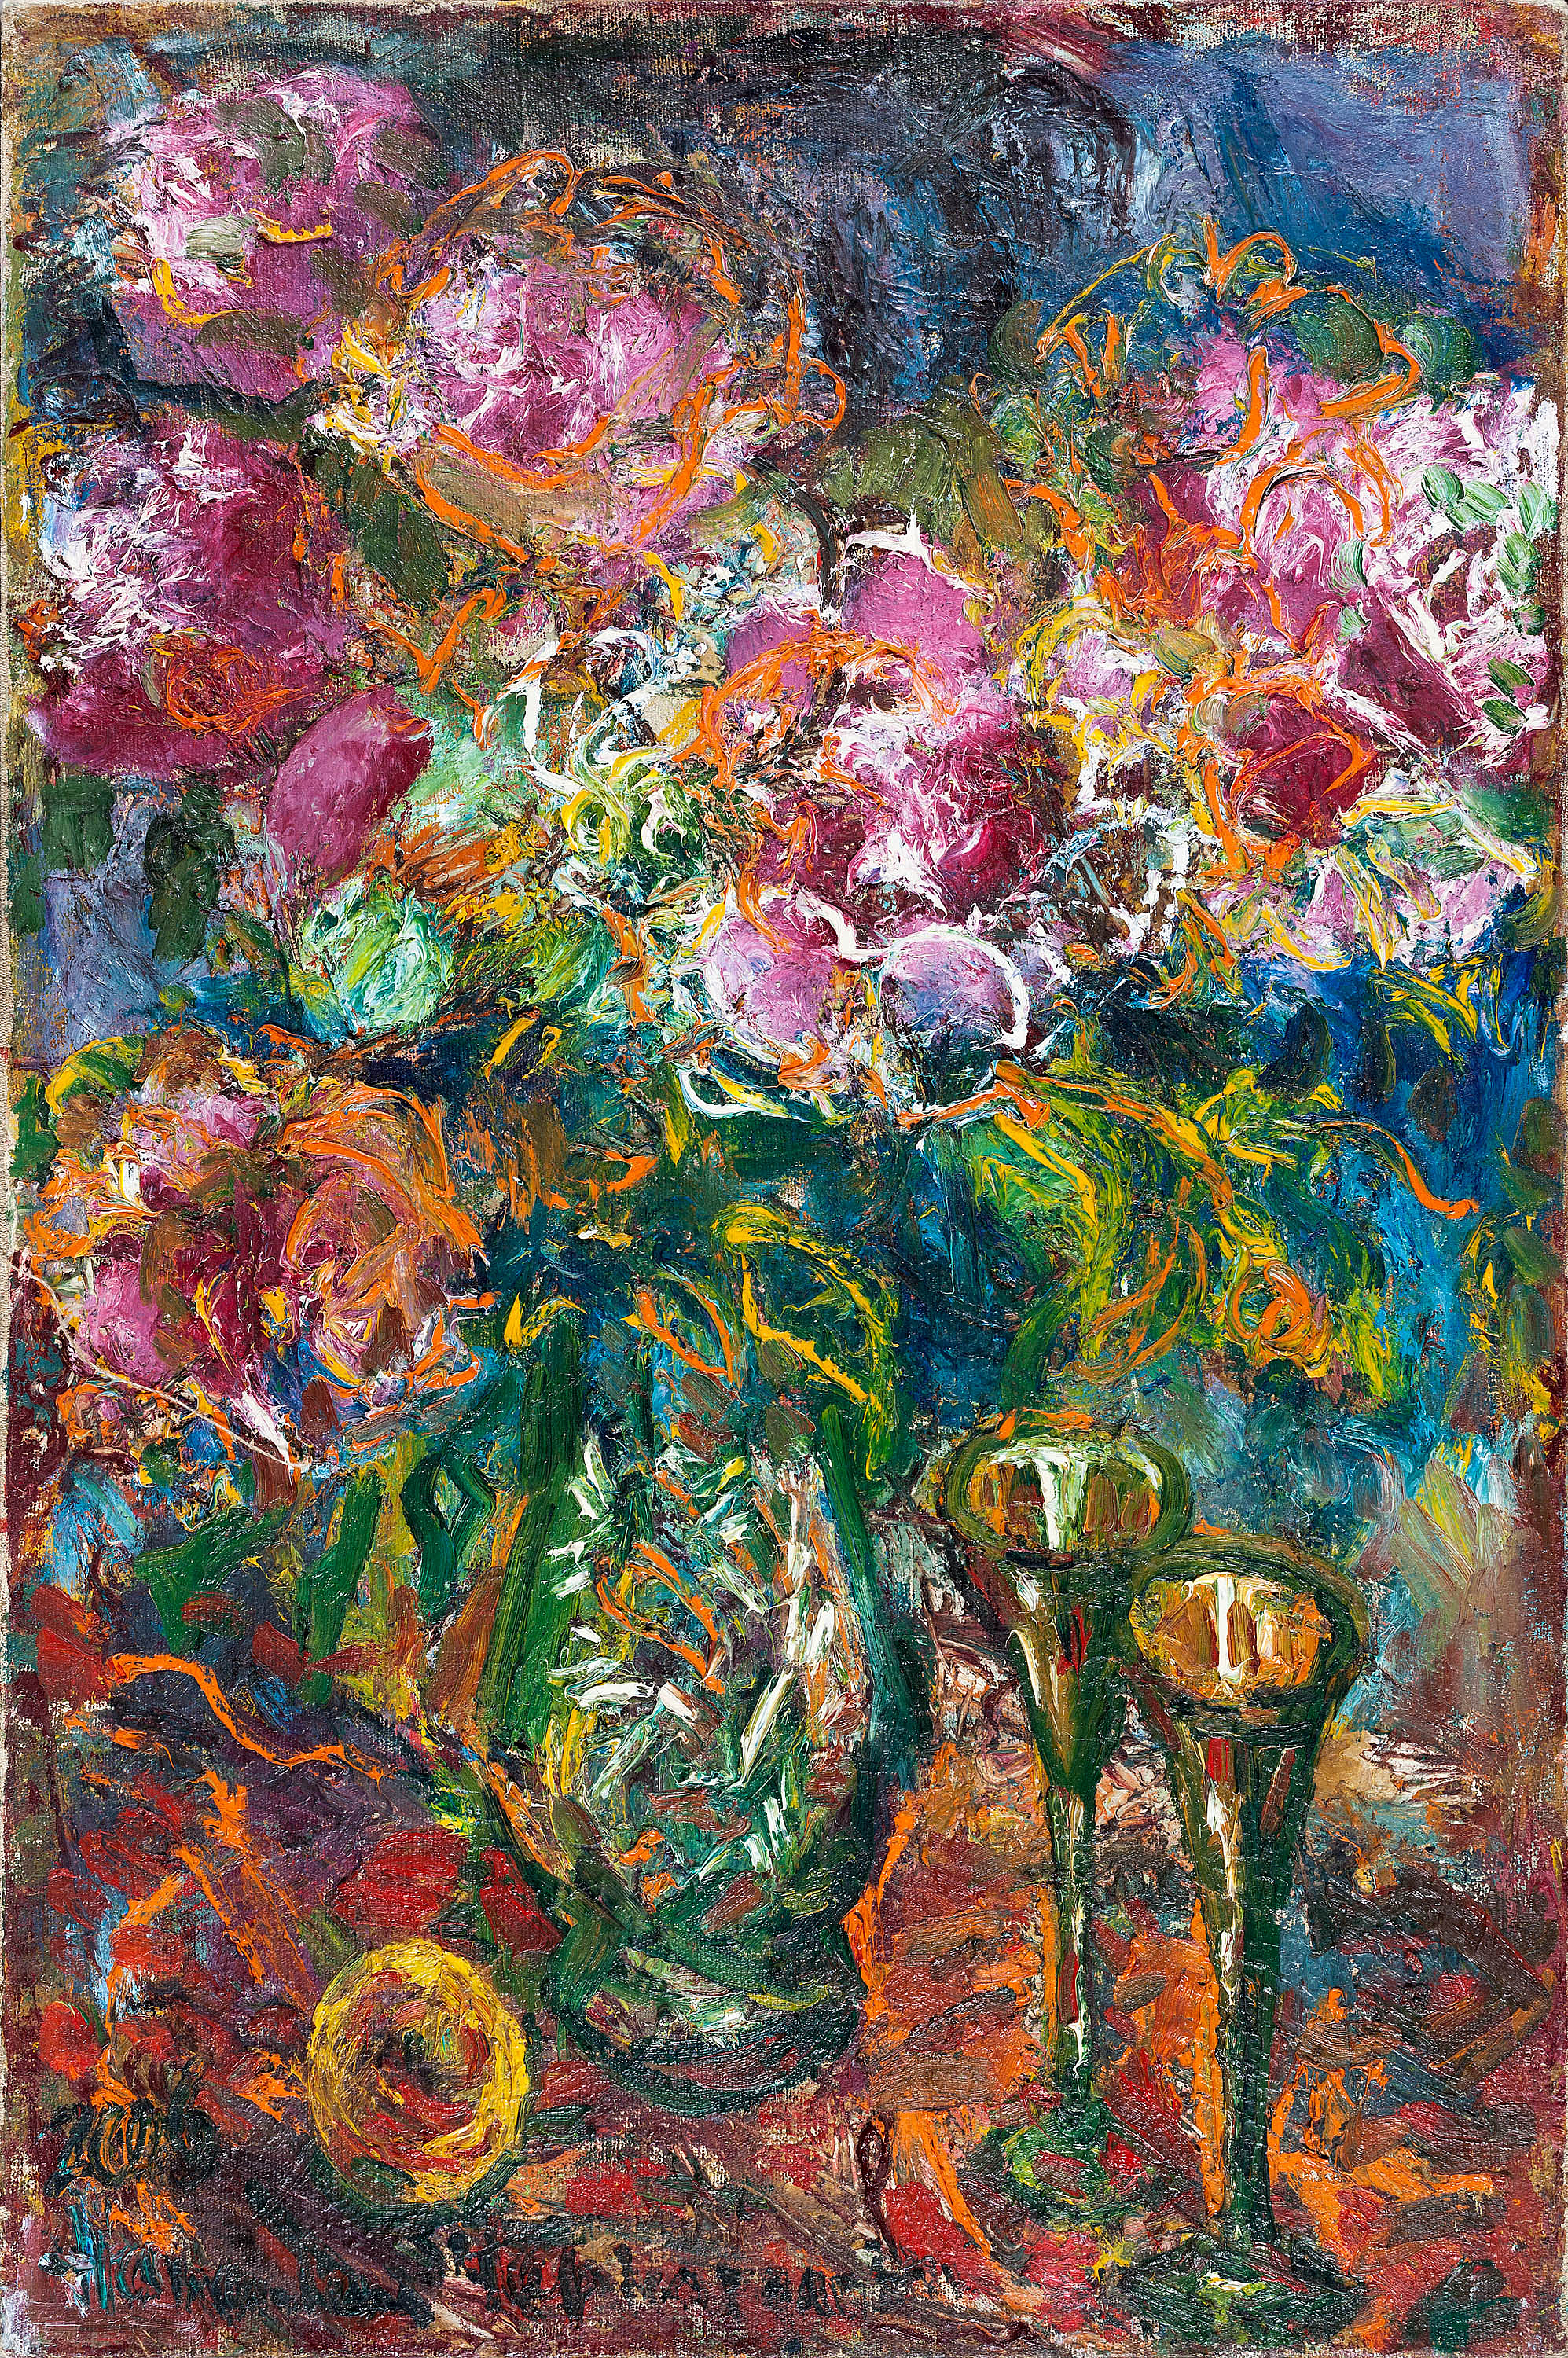 STILL-LIFE WITH PEONIES